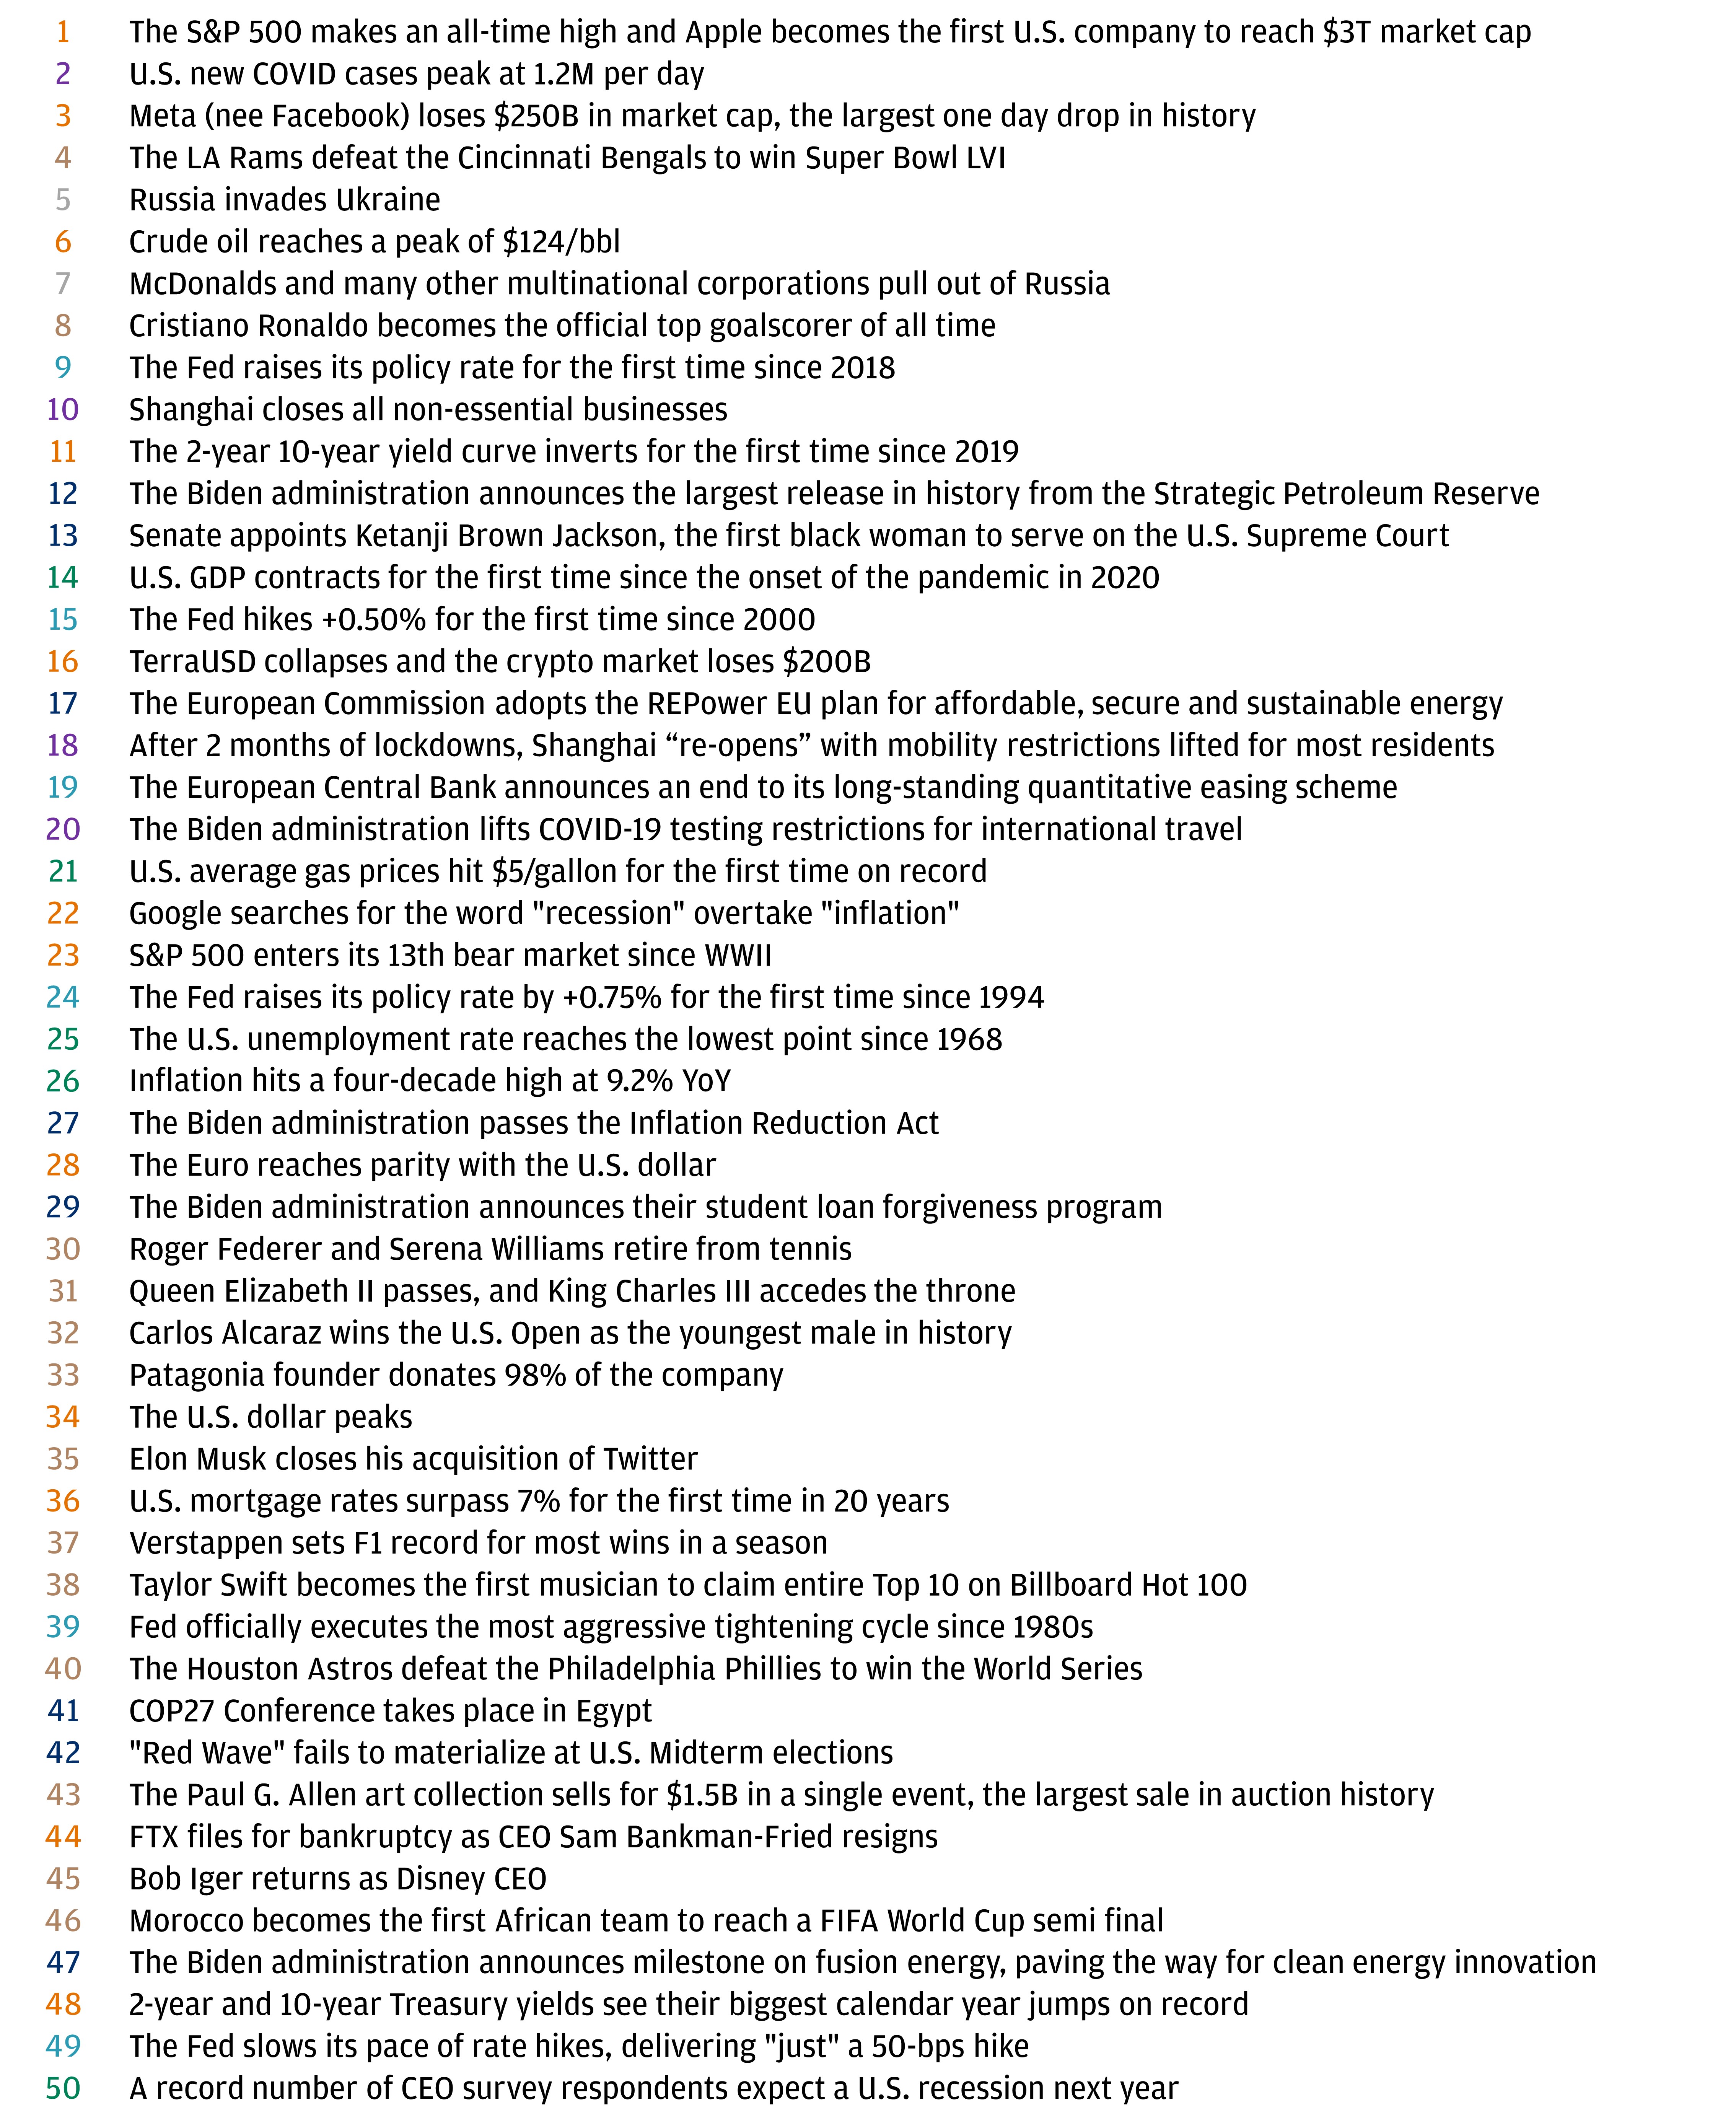 This table shows the 50 key events that occurred in 2022.